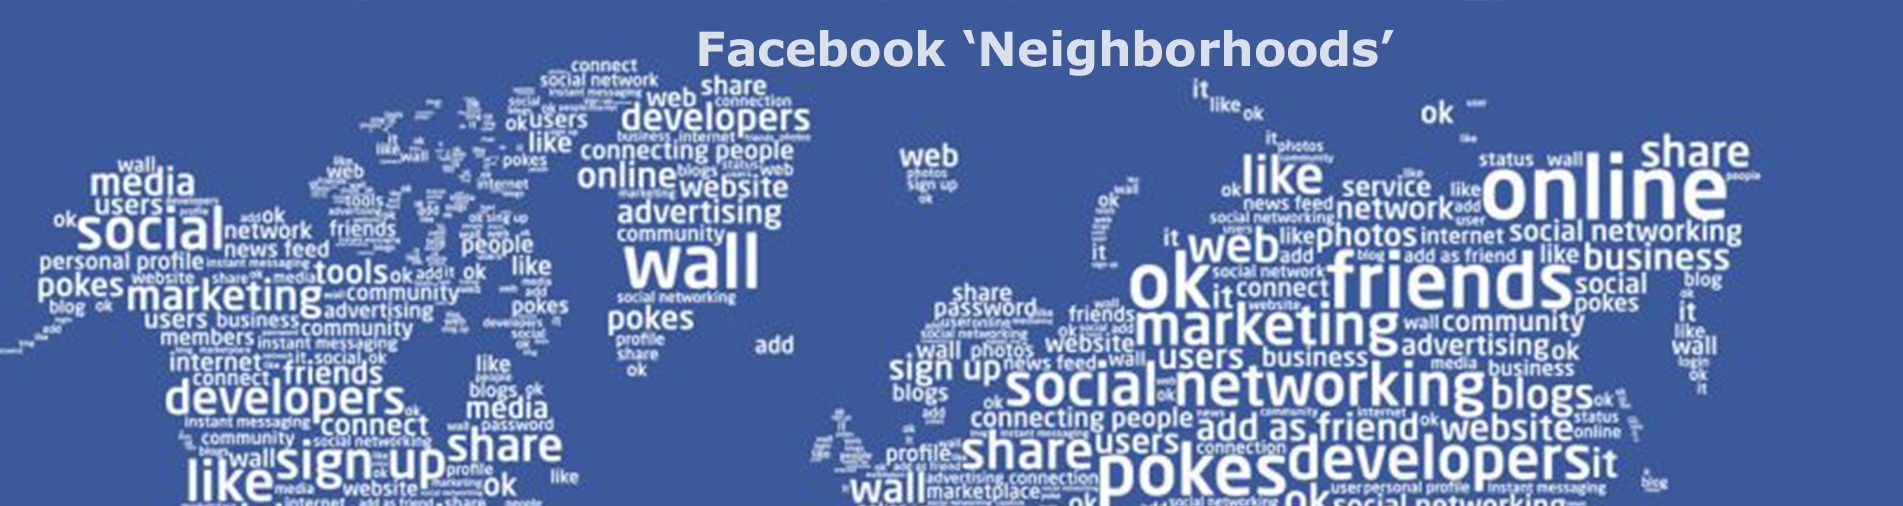 Facebook Launches ‘Neighborhoods’ to Connect Local Communities More Easily